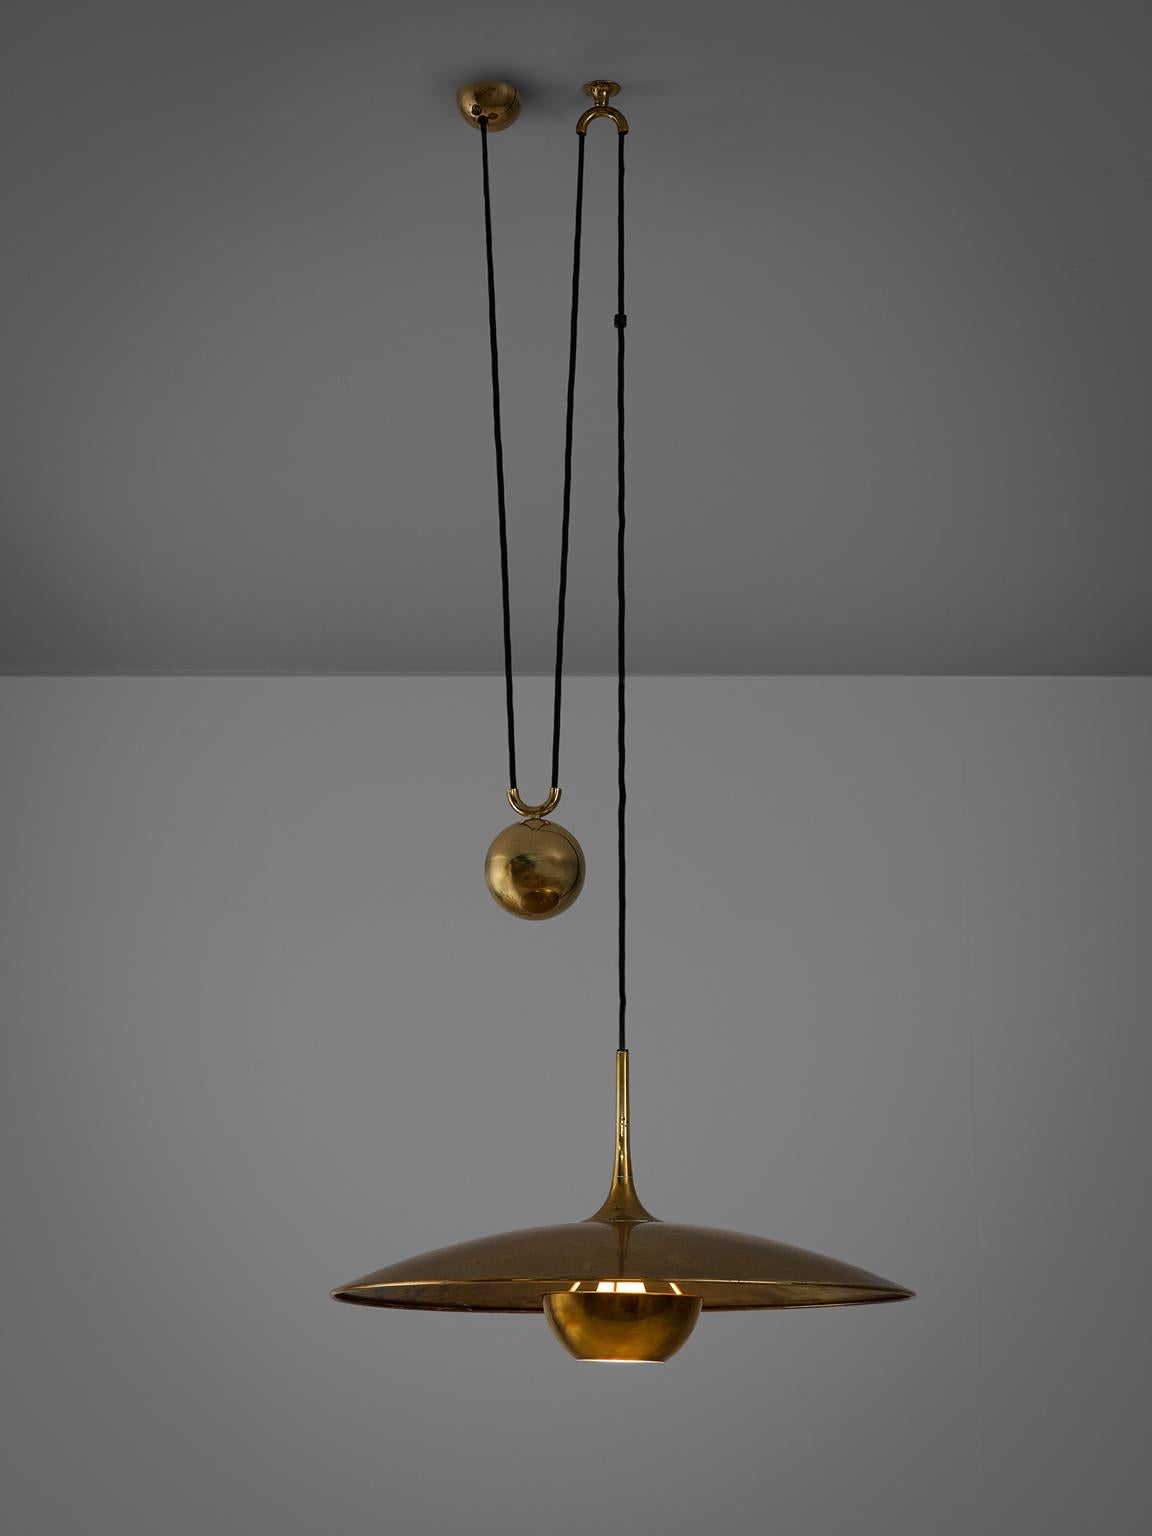 Florian Schulz, 'Onos 55' pendant lamp, brass, Germany, 1970s.

Stunning Florian Schulz Onos 55 pendant lamp executed in brass with counterweight. This piece is equipped with a lampshade. This shade is 40 cm in diameter. The counterweight allows